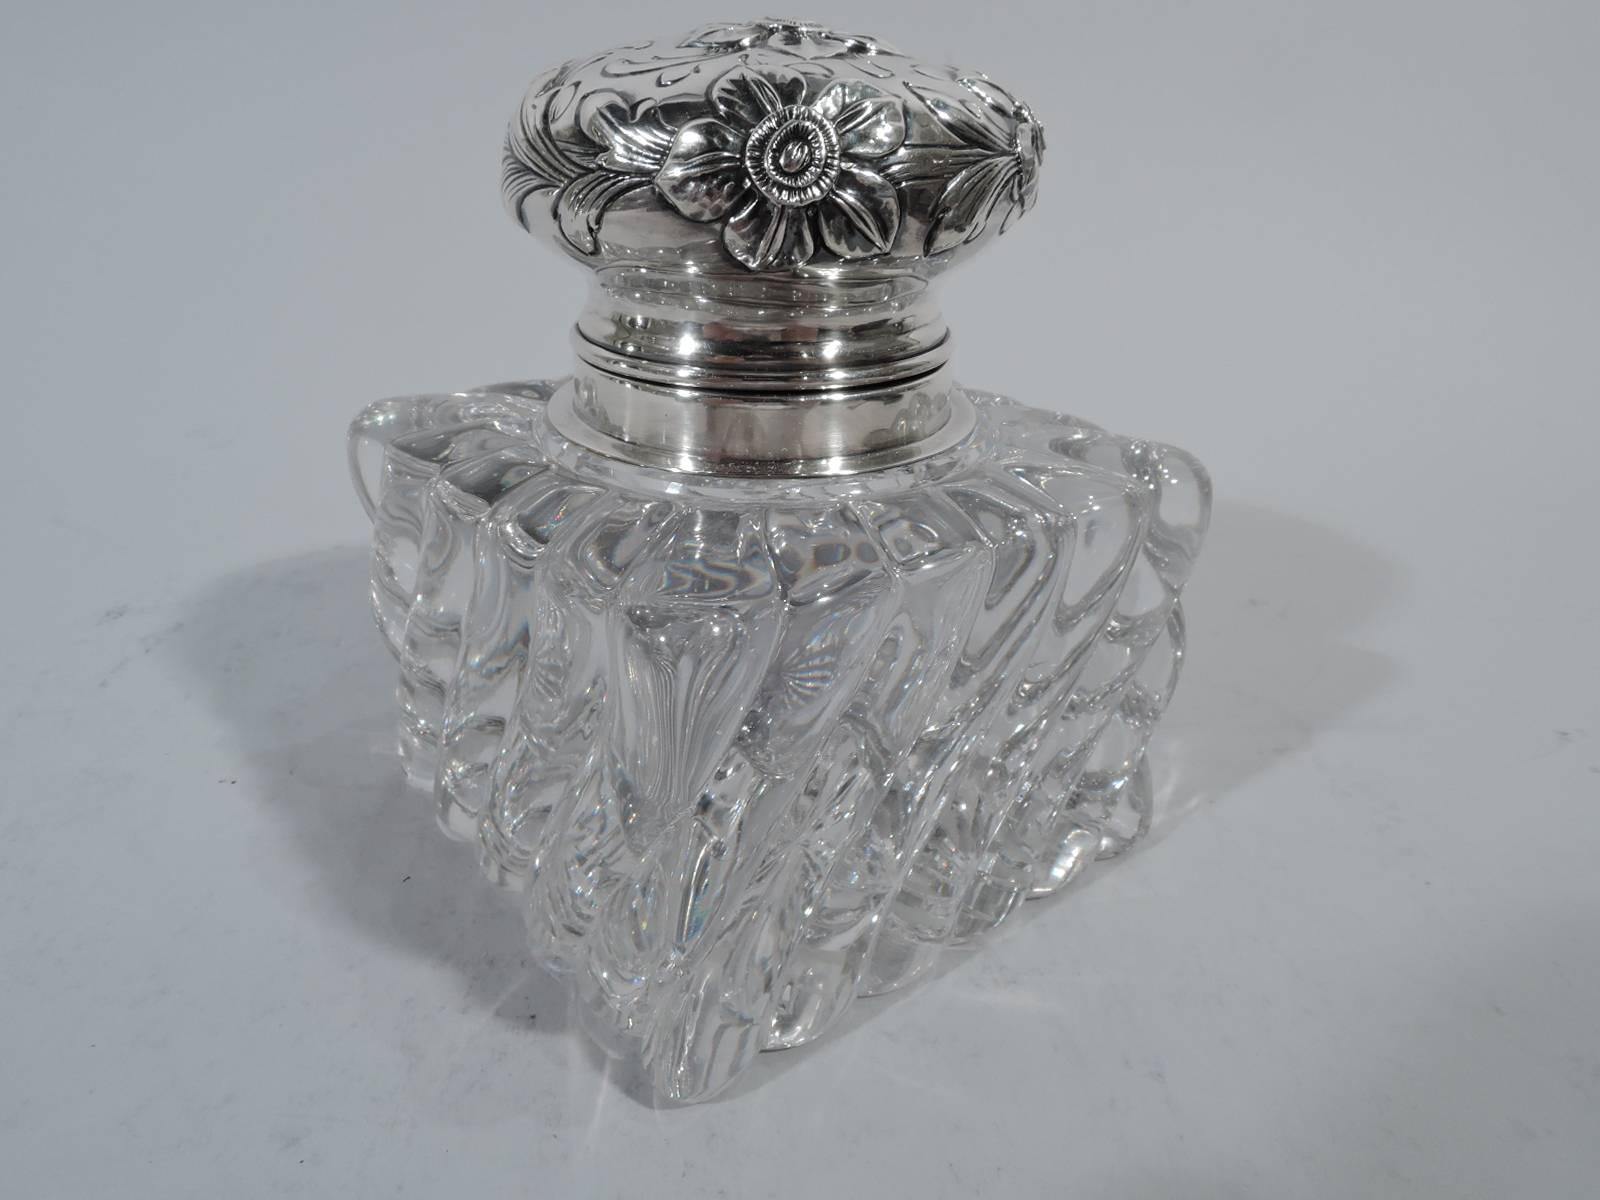 Pretty sterling silver and glass inkwell. Made by Shiebler in New York, circa 1900. Square clear glass with twisted flutes. Star cut to underside. Short neck with sterling silver collar and hinged bun cover. Pretty chased and repousse flowers on